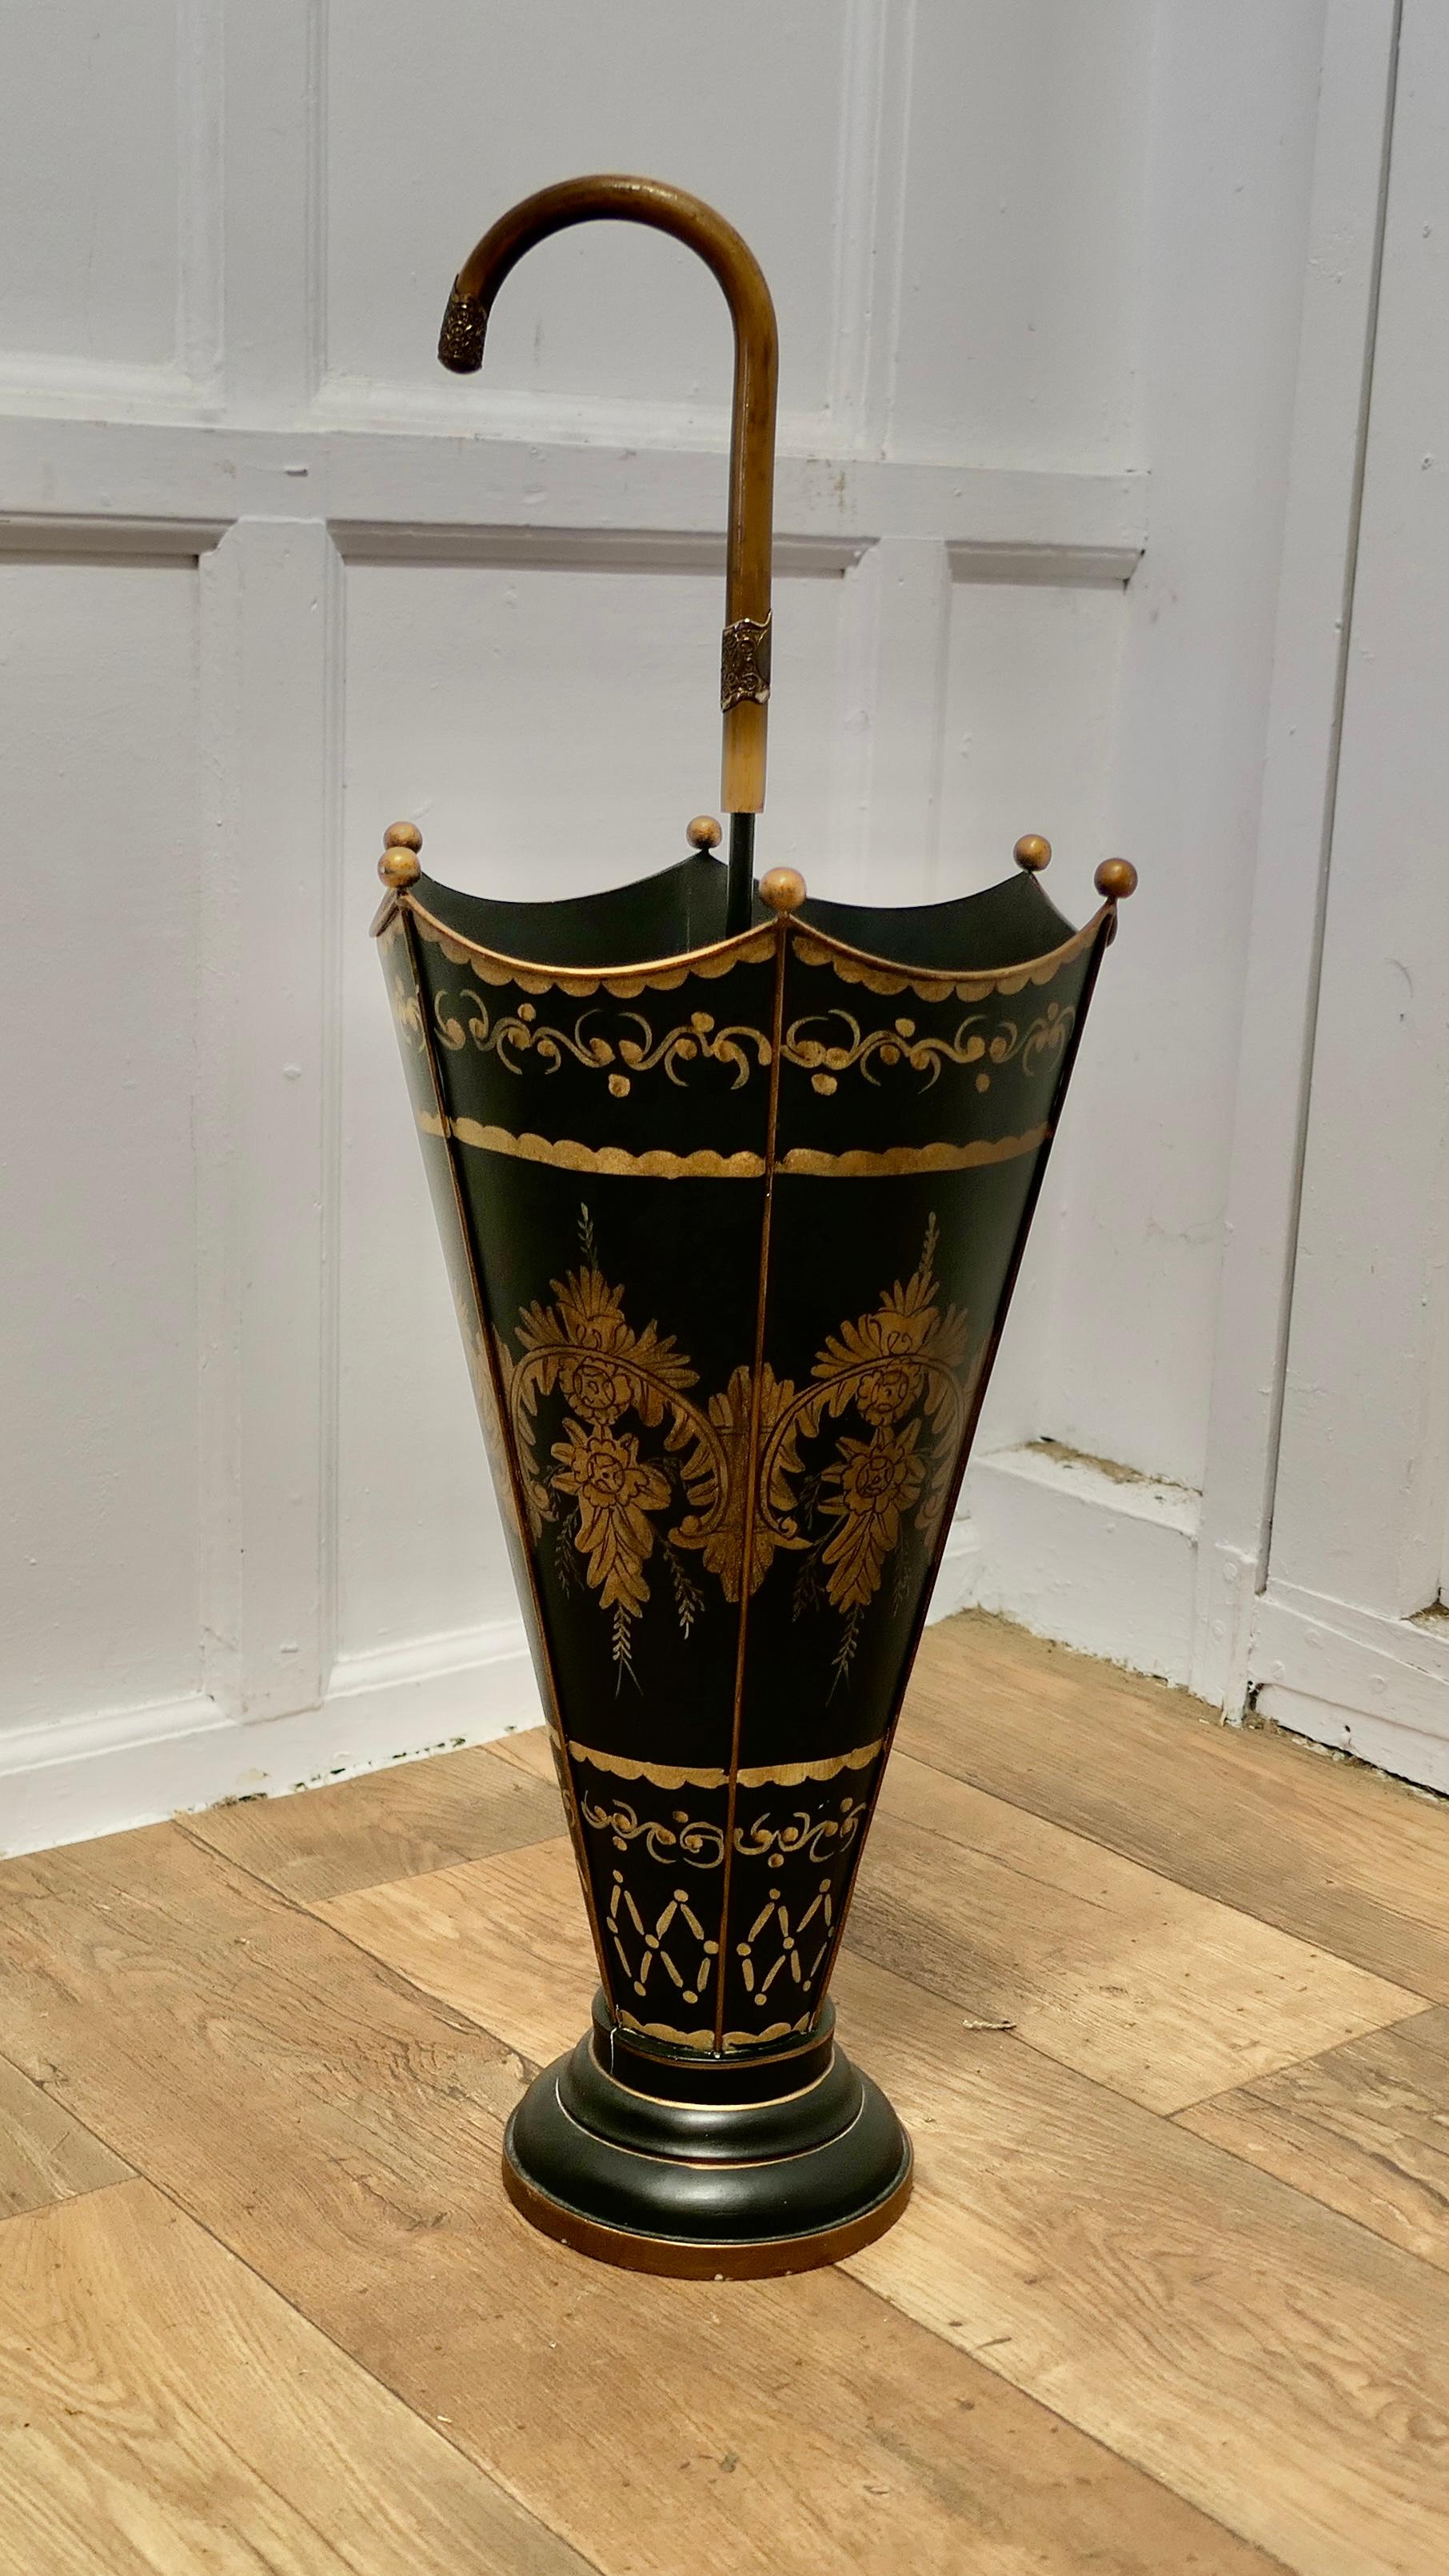 Regency Revival A Superb Italian Toleware Umbrella Stand, Hand Painted Gold on Black    For Sale